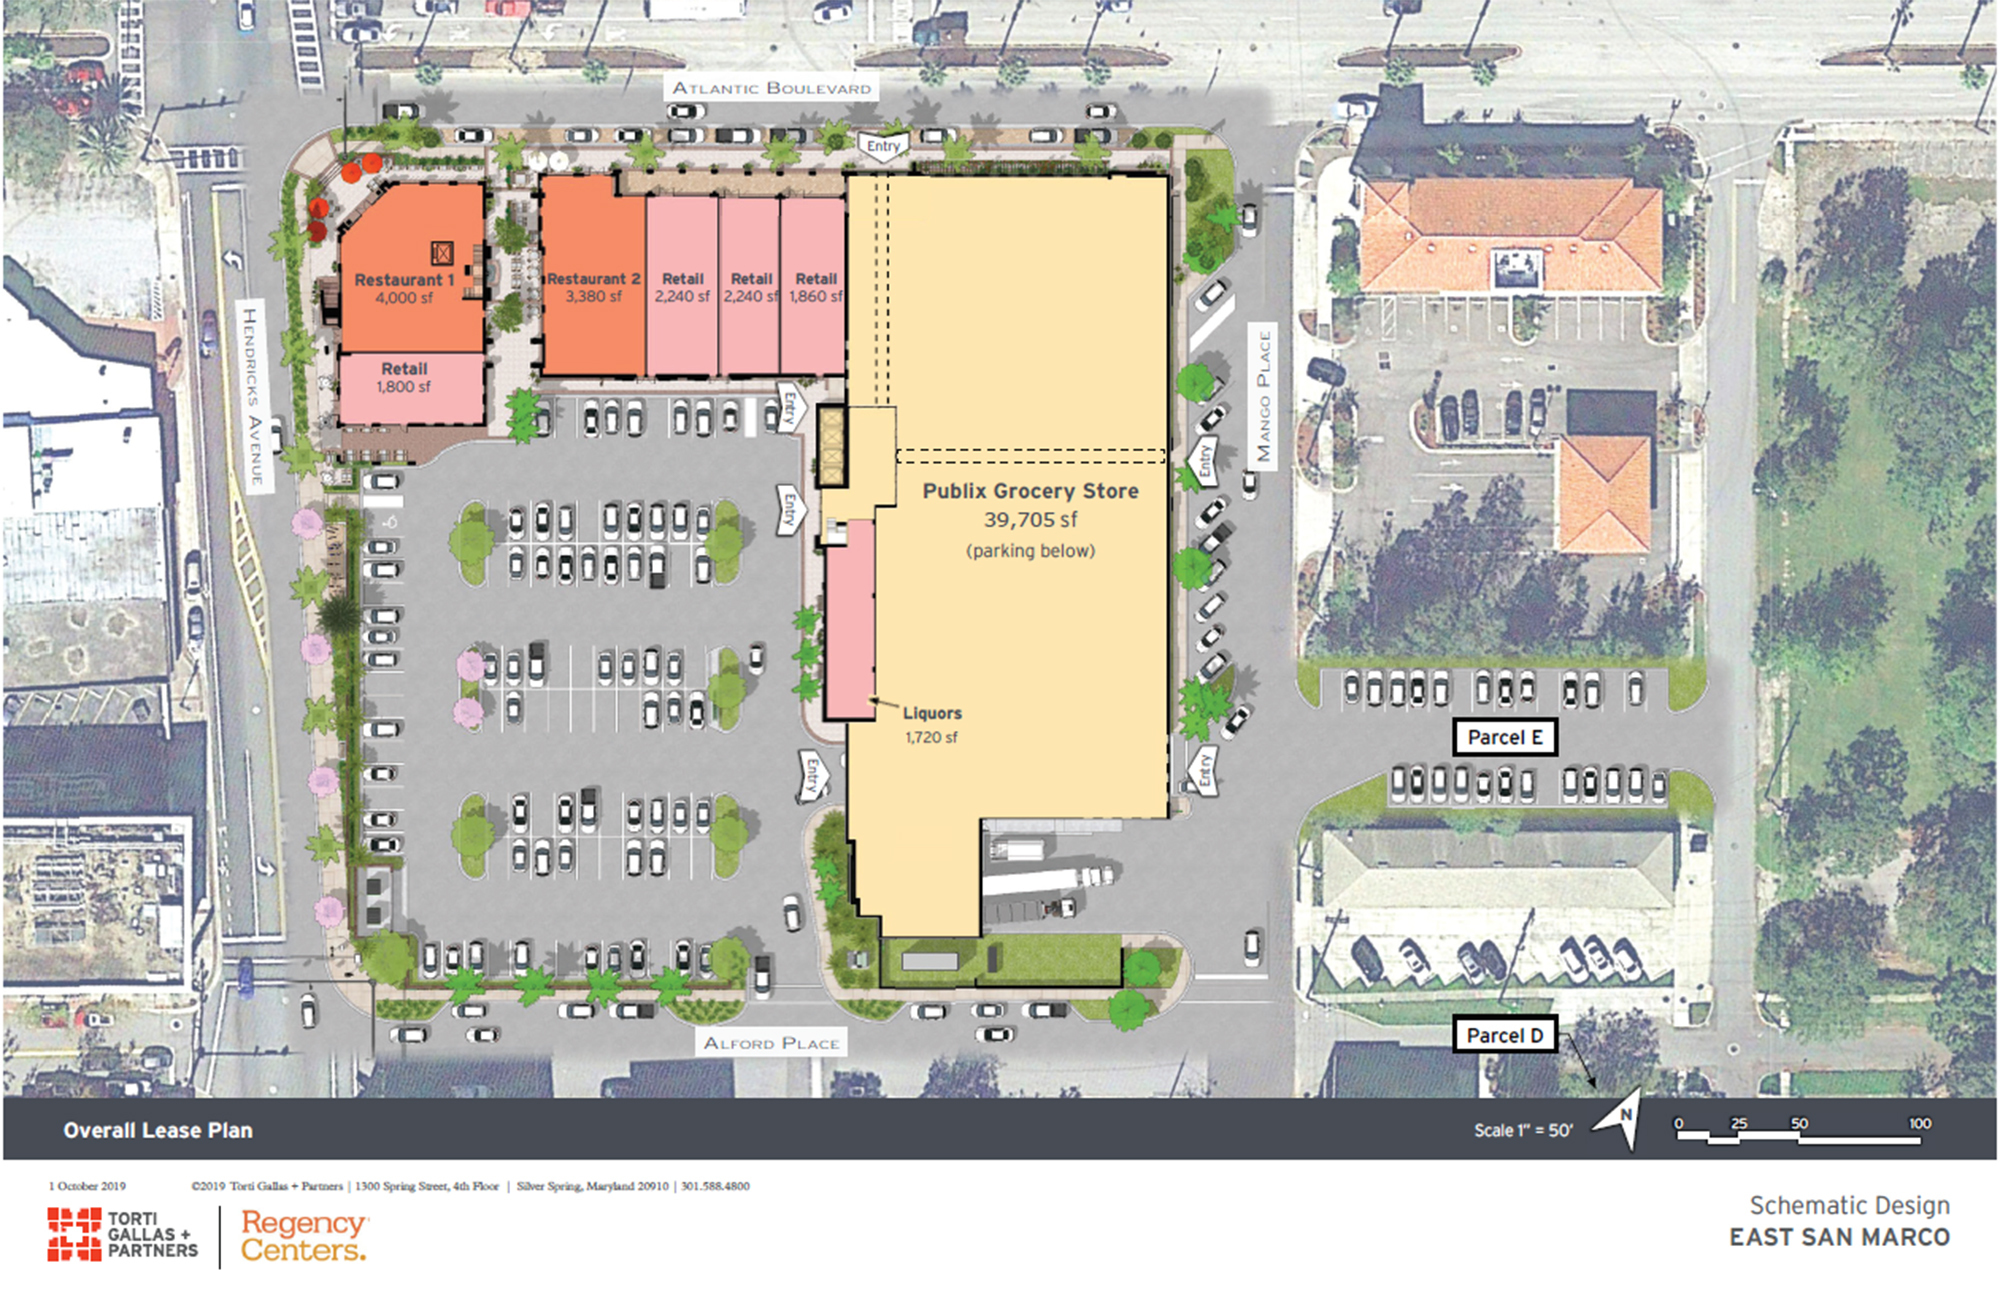 Plans for the East San Marco shopping center.